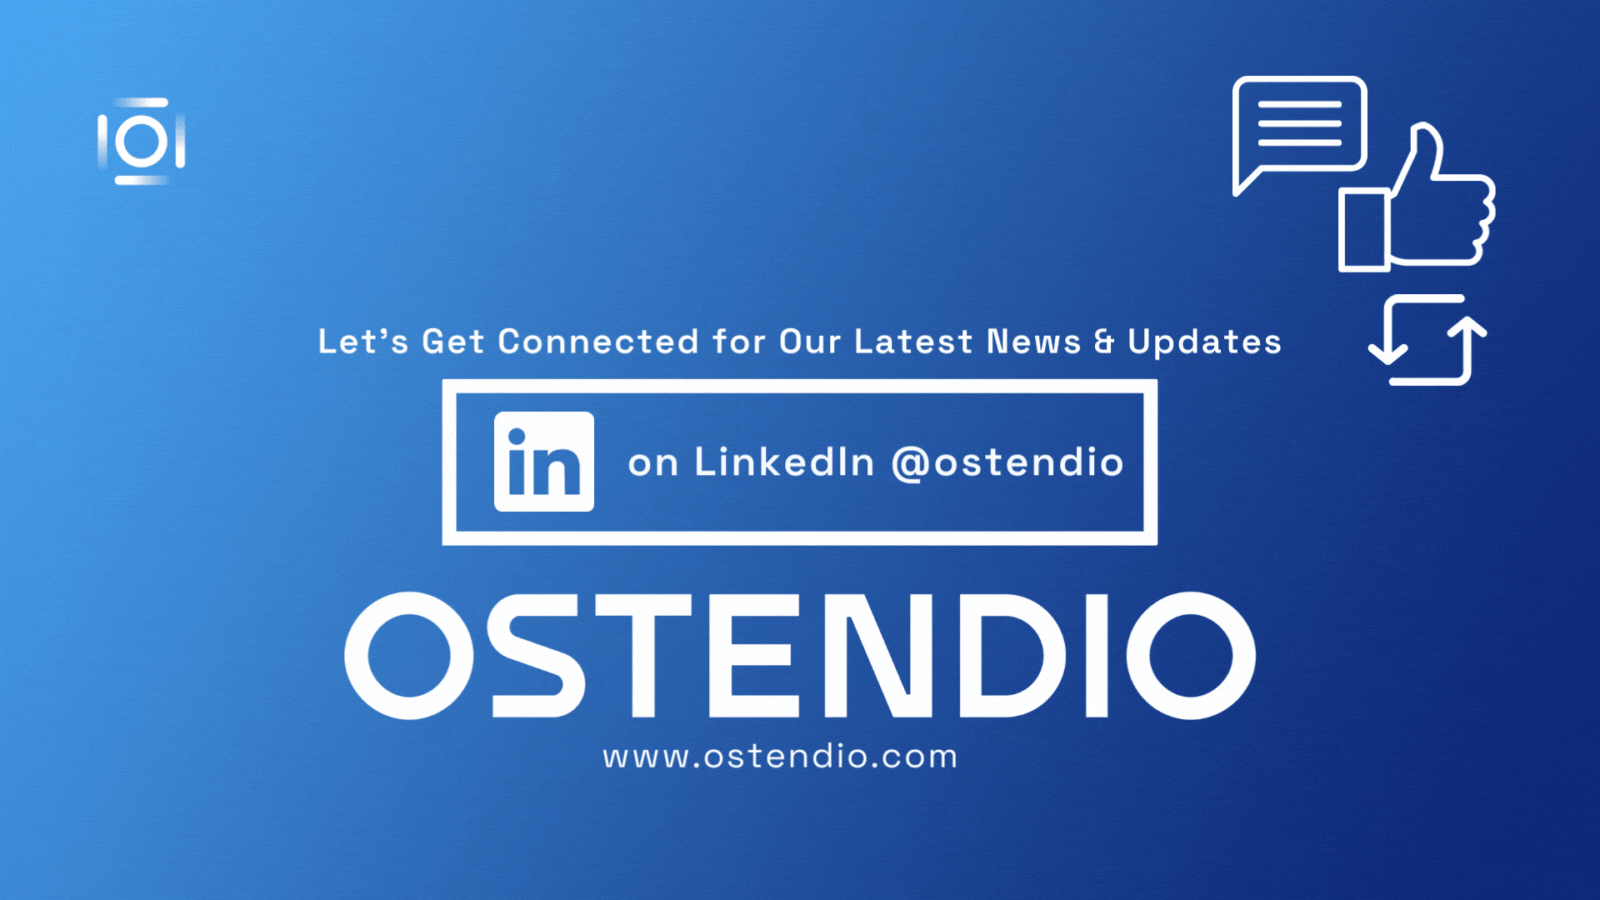 Follow Ostendio on LinkedIn for all our news and updates